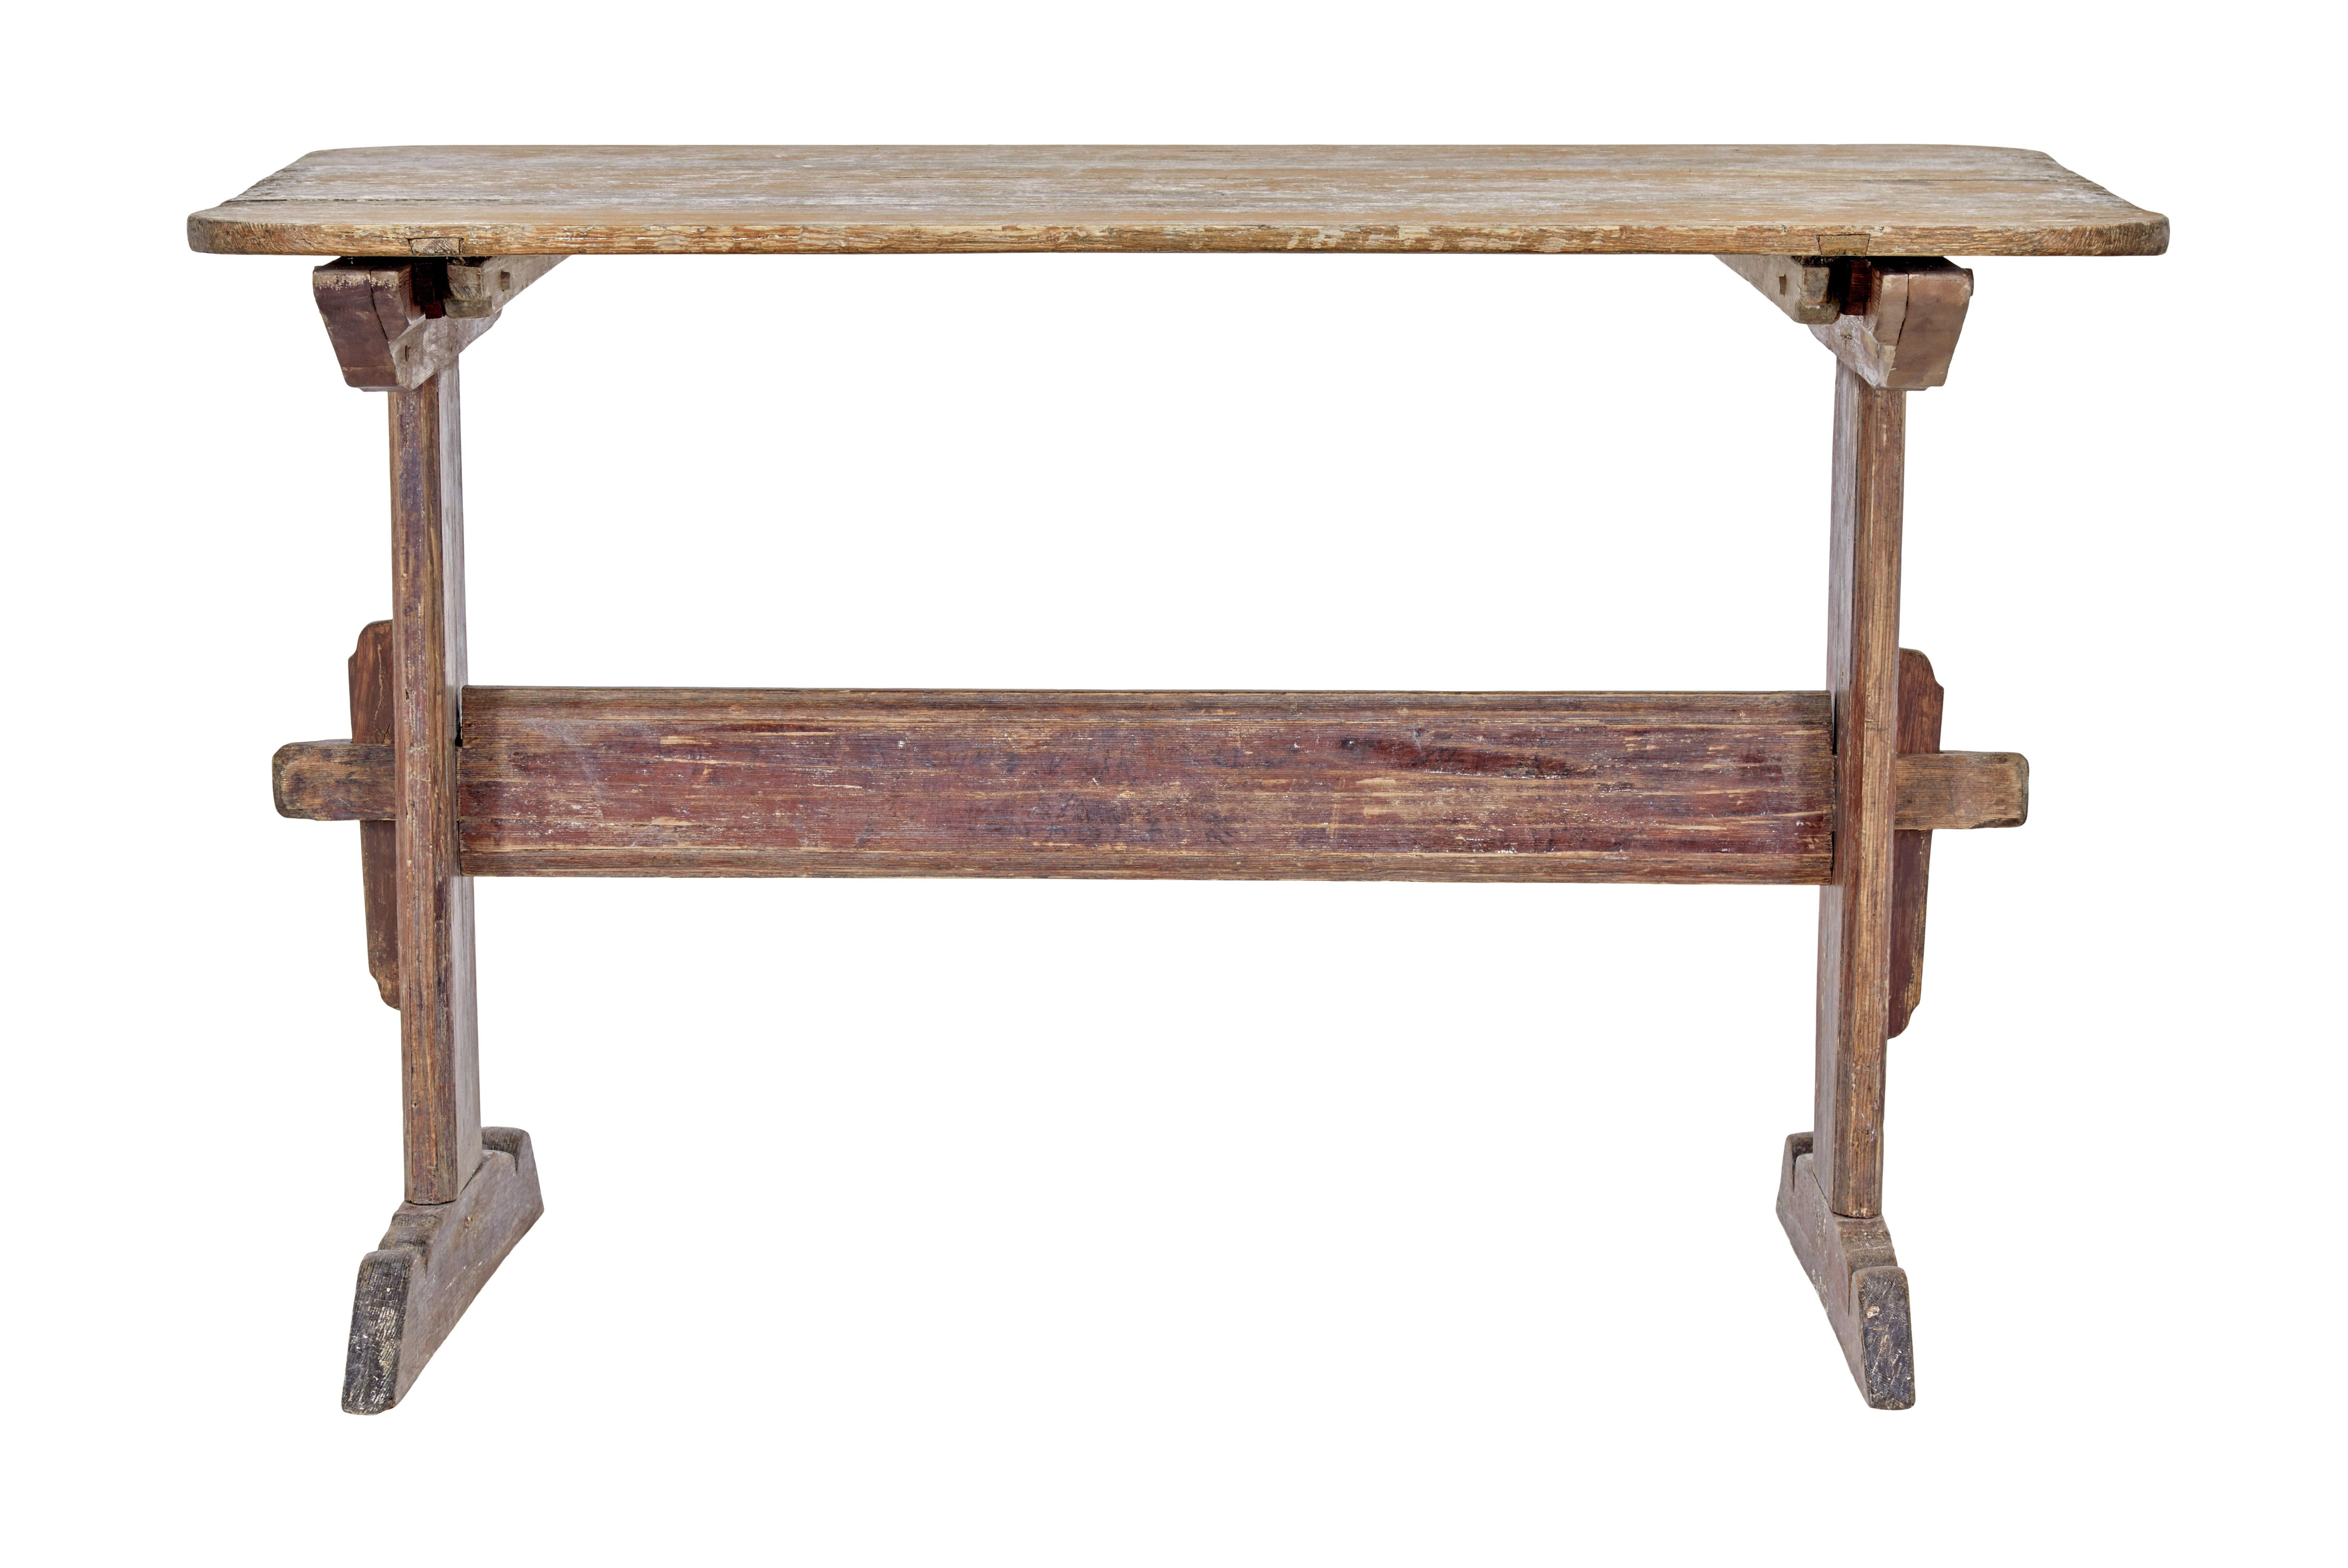 19th century rustic swedish painted trestle table circa 1840.

Here we have a traditional swedish table with traces of the original paint.

Light orange painted top with evidence that it may have been used for baking, supported red painted trestle